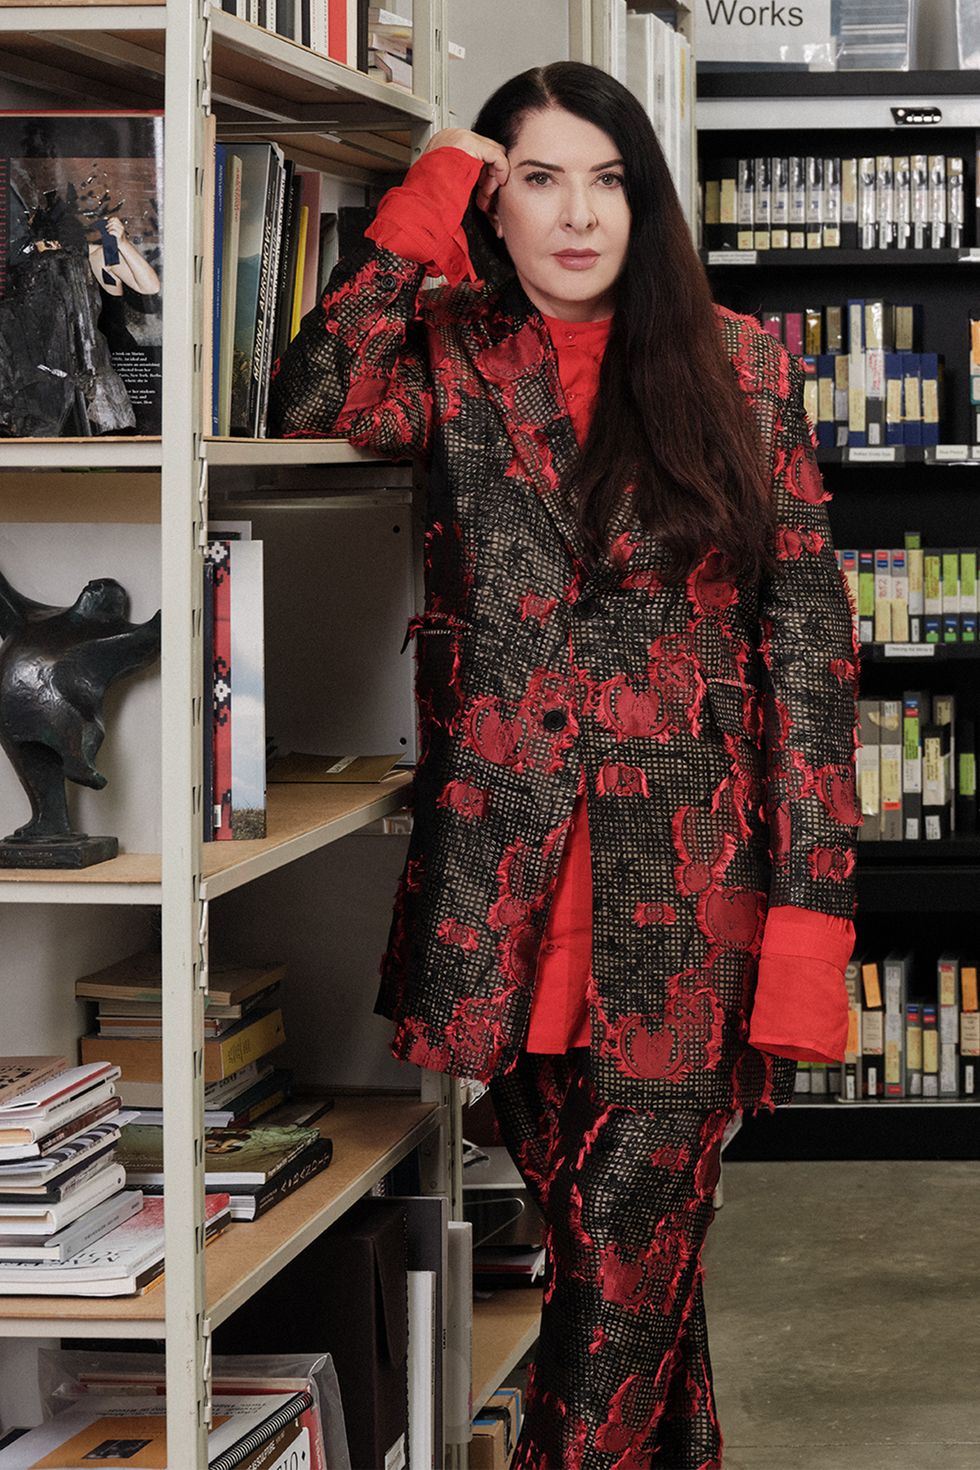 a woman wearing a red and black dress in a room with bookshelves